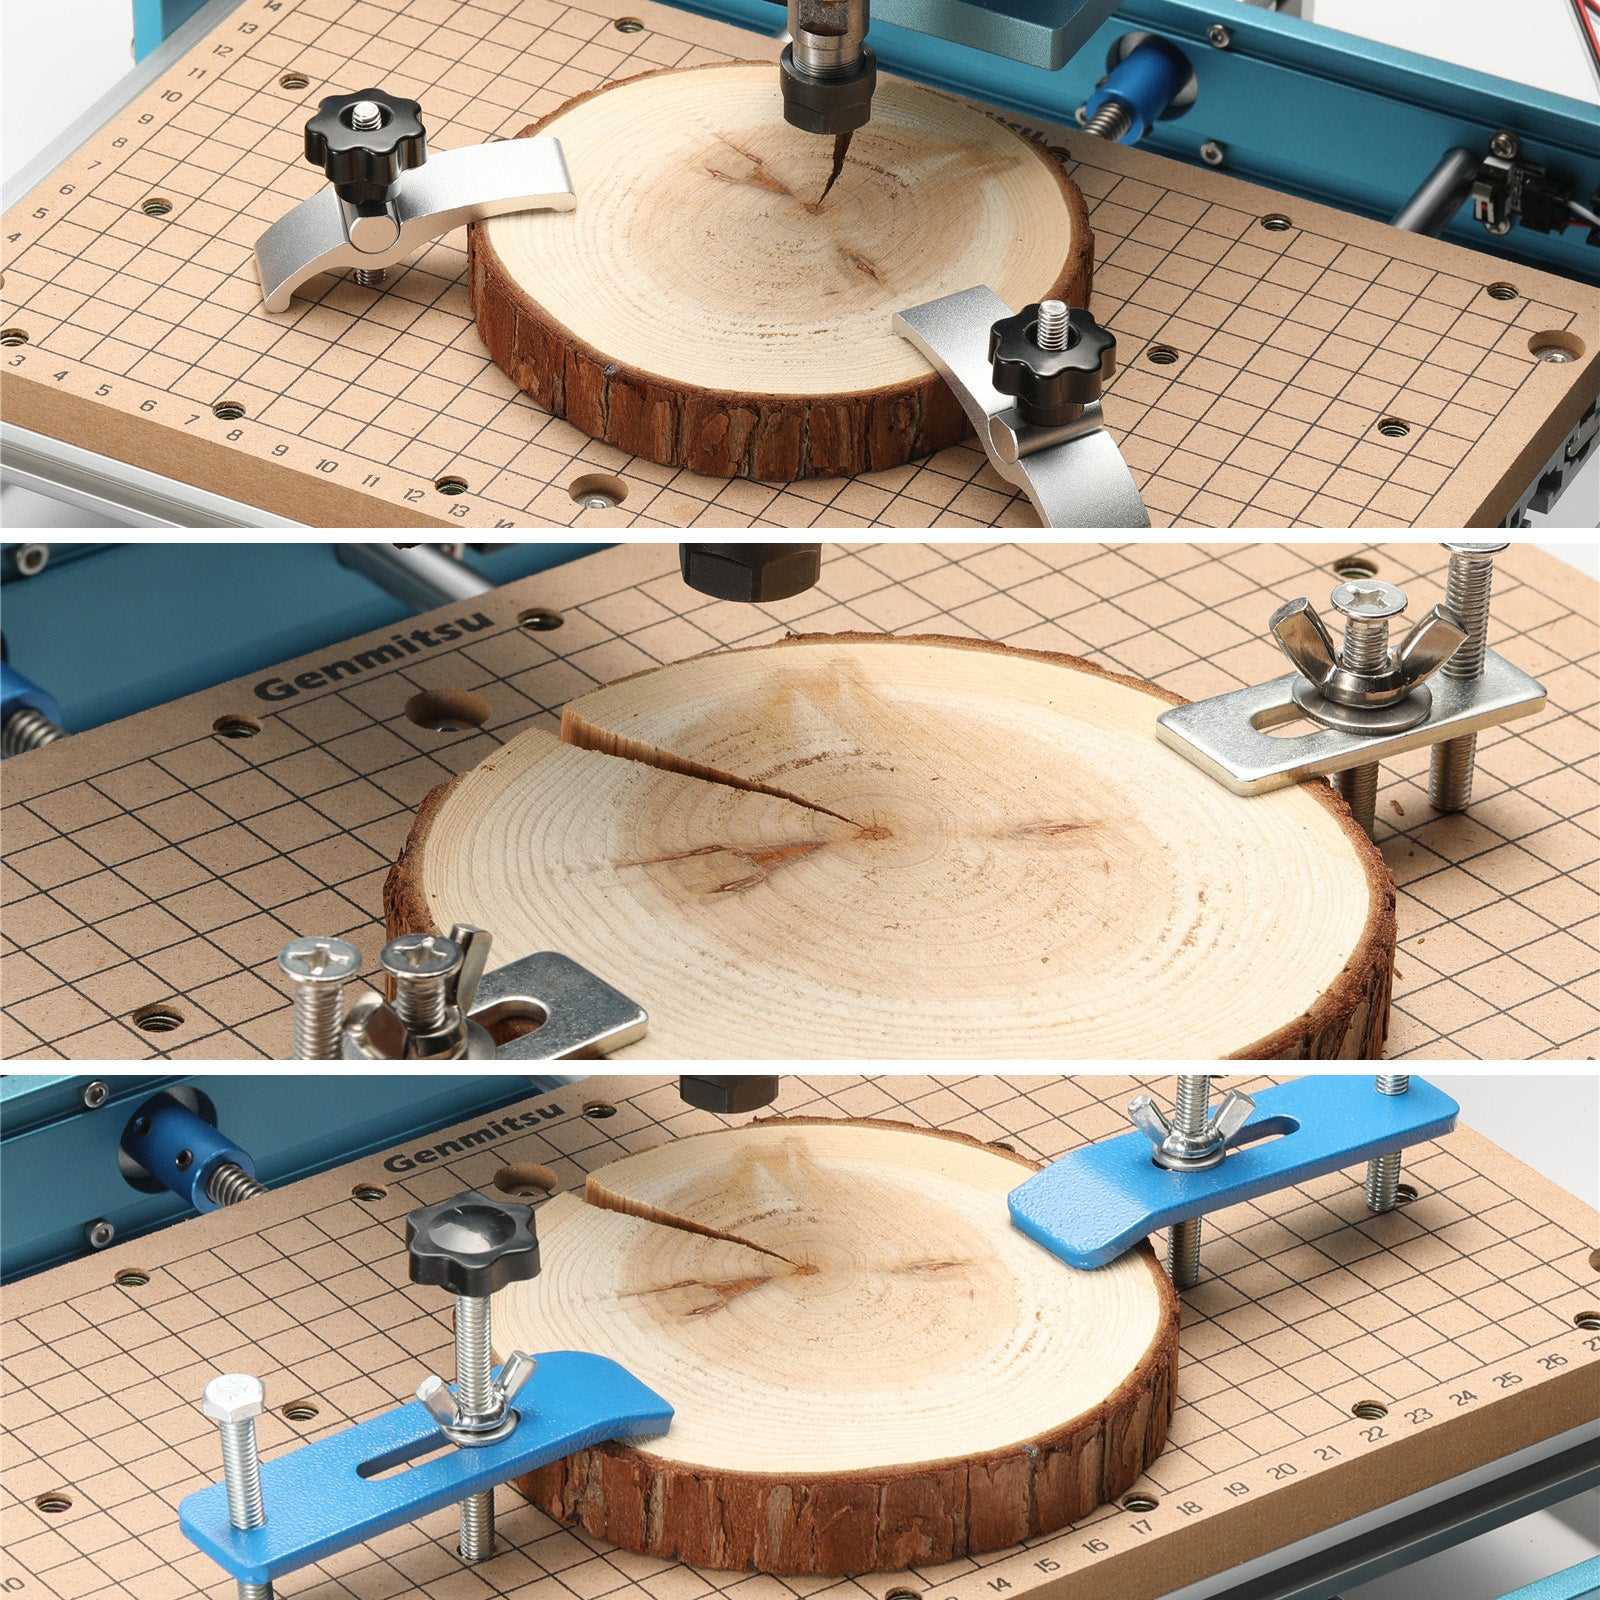 Genmitsu CNC MDF Spoilboard with Scale Grid for 3018 CNC Router | SainSmart